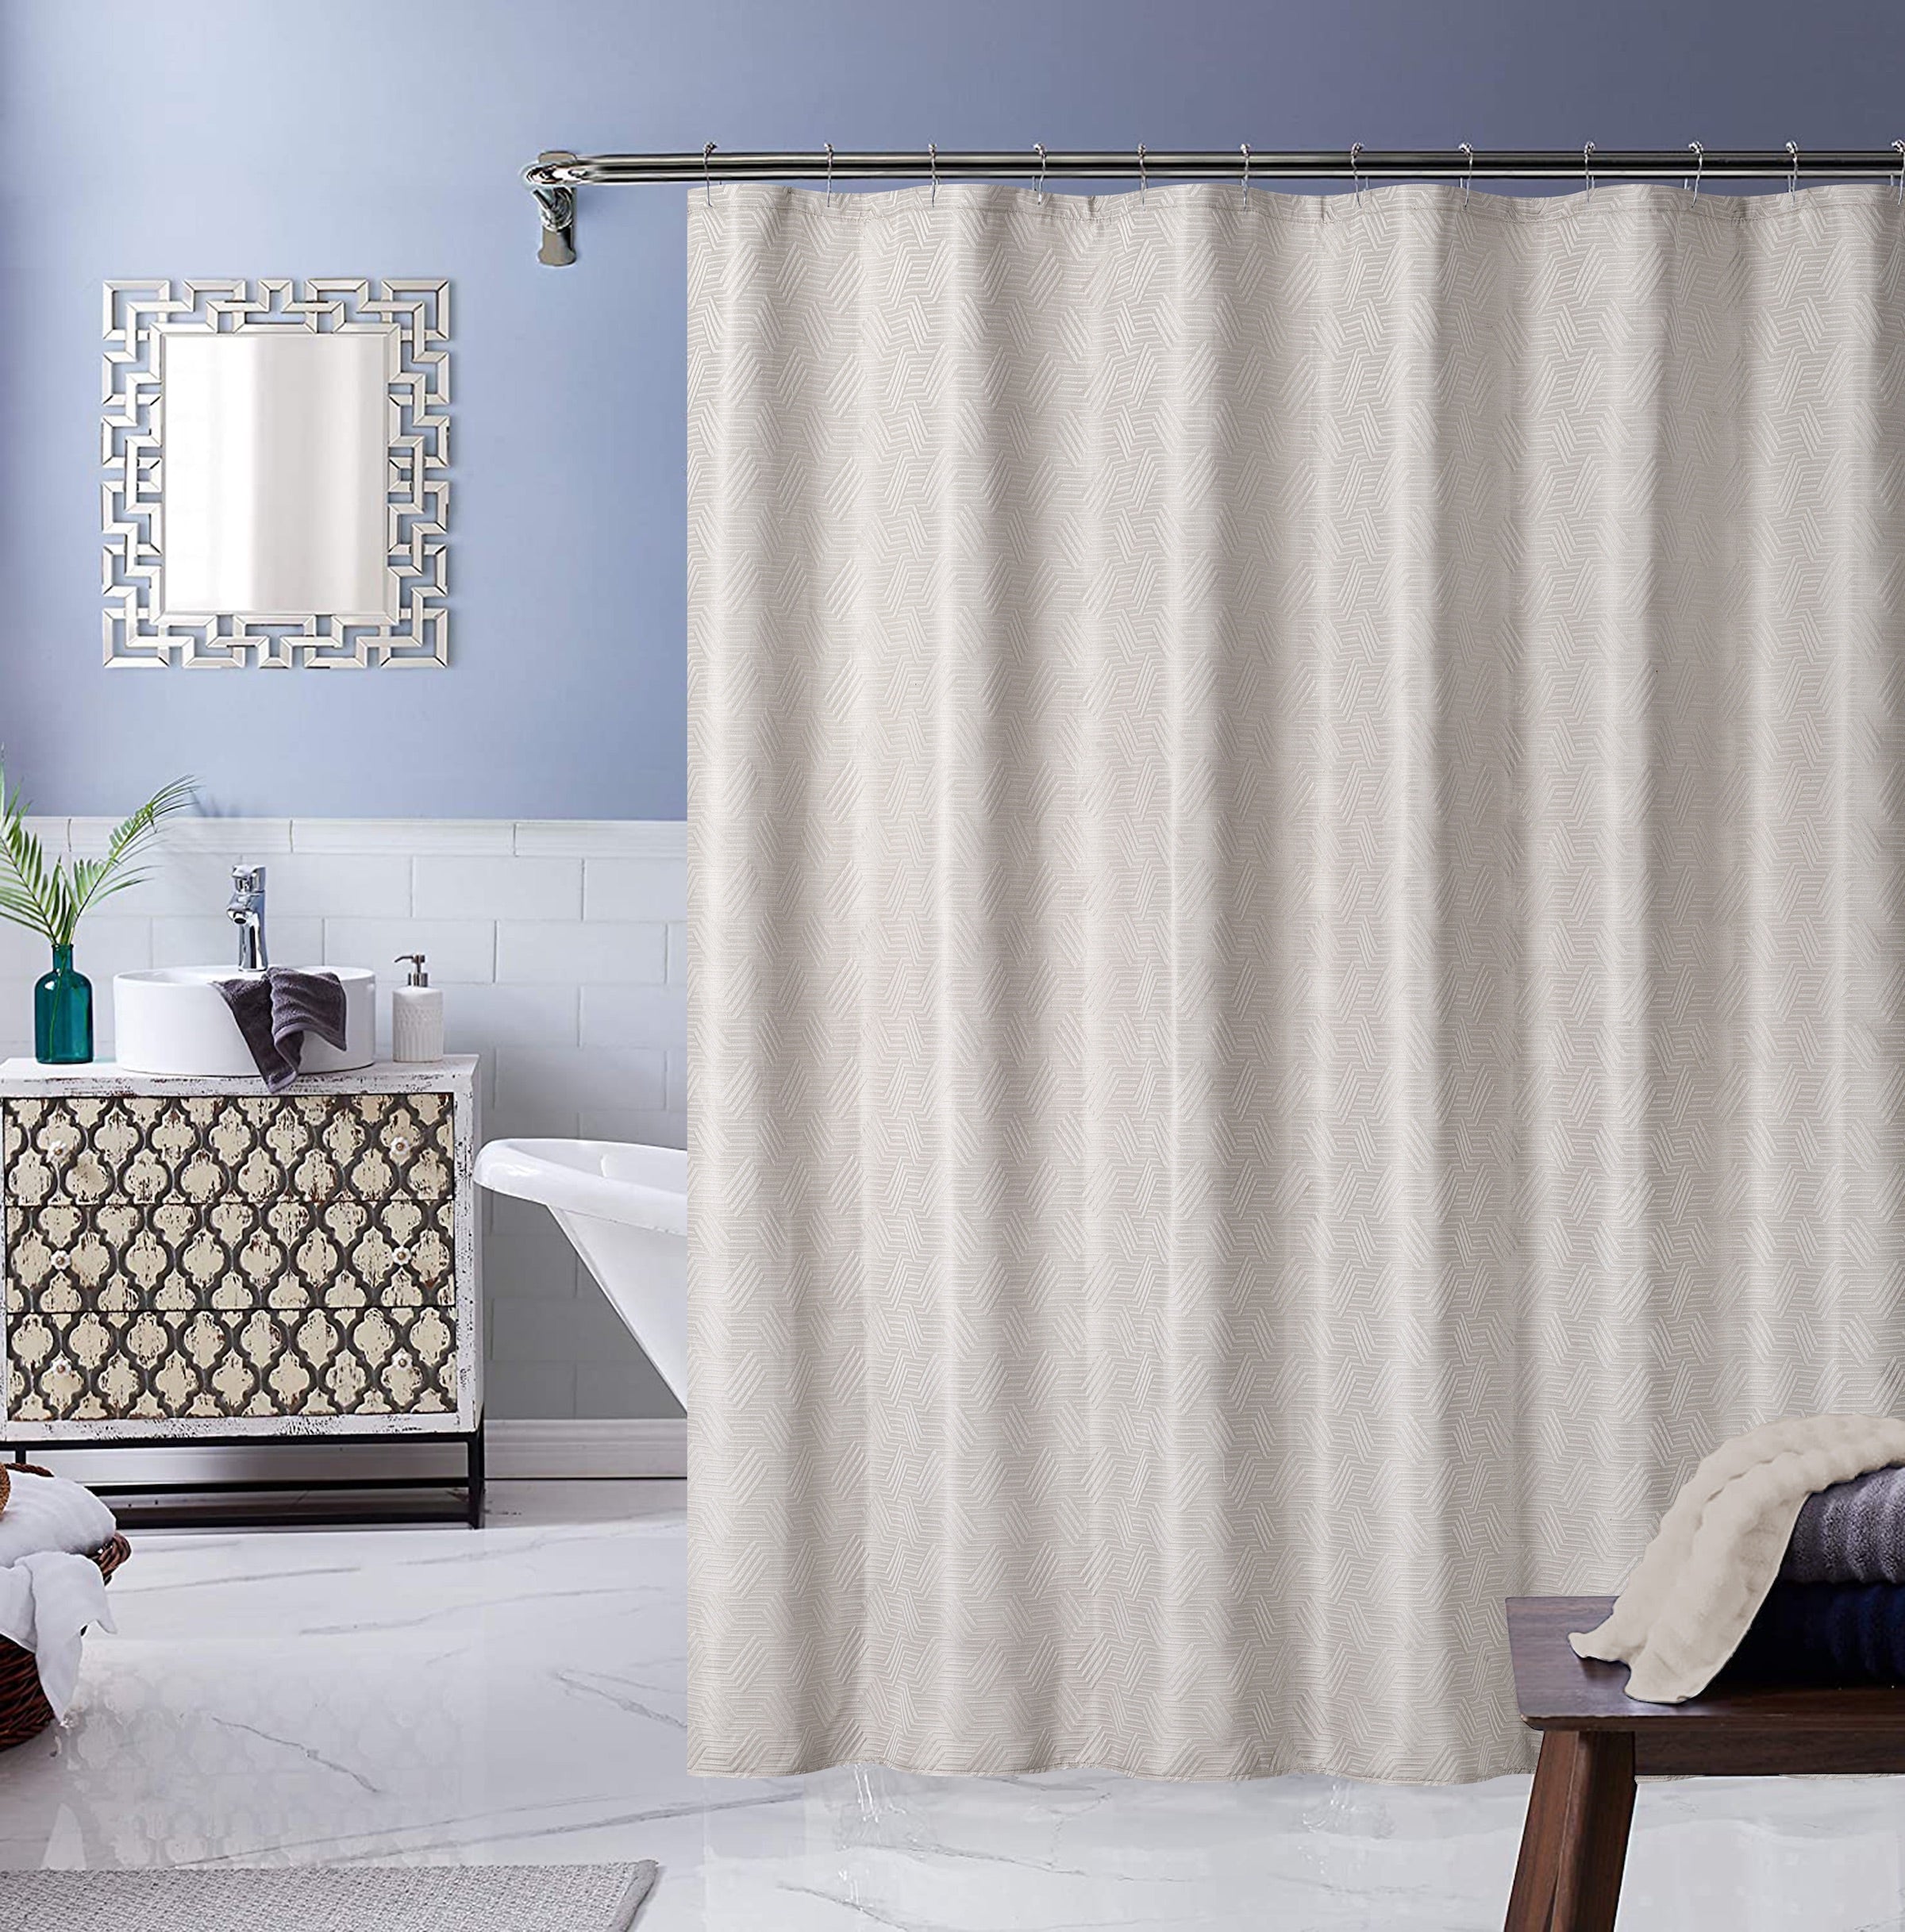 Dainty Home Monte Carlo 3D Embossed Textured Cotton Feel Geometric Designed Fabric Shower Curtain